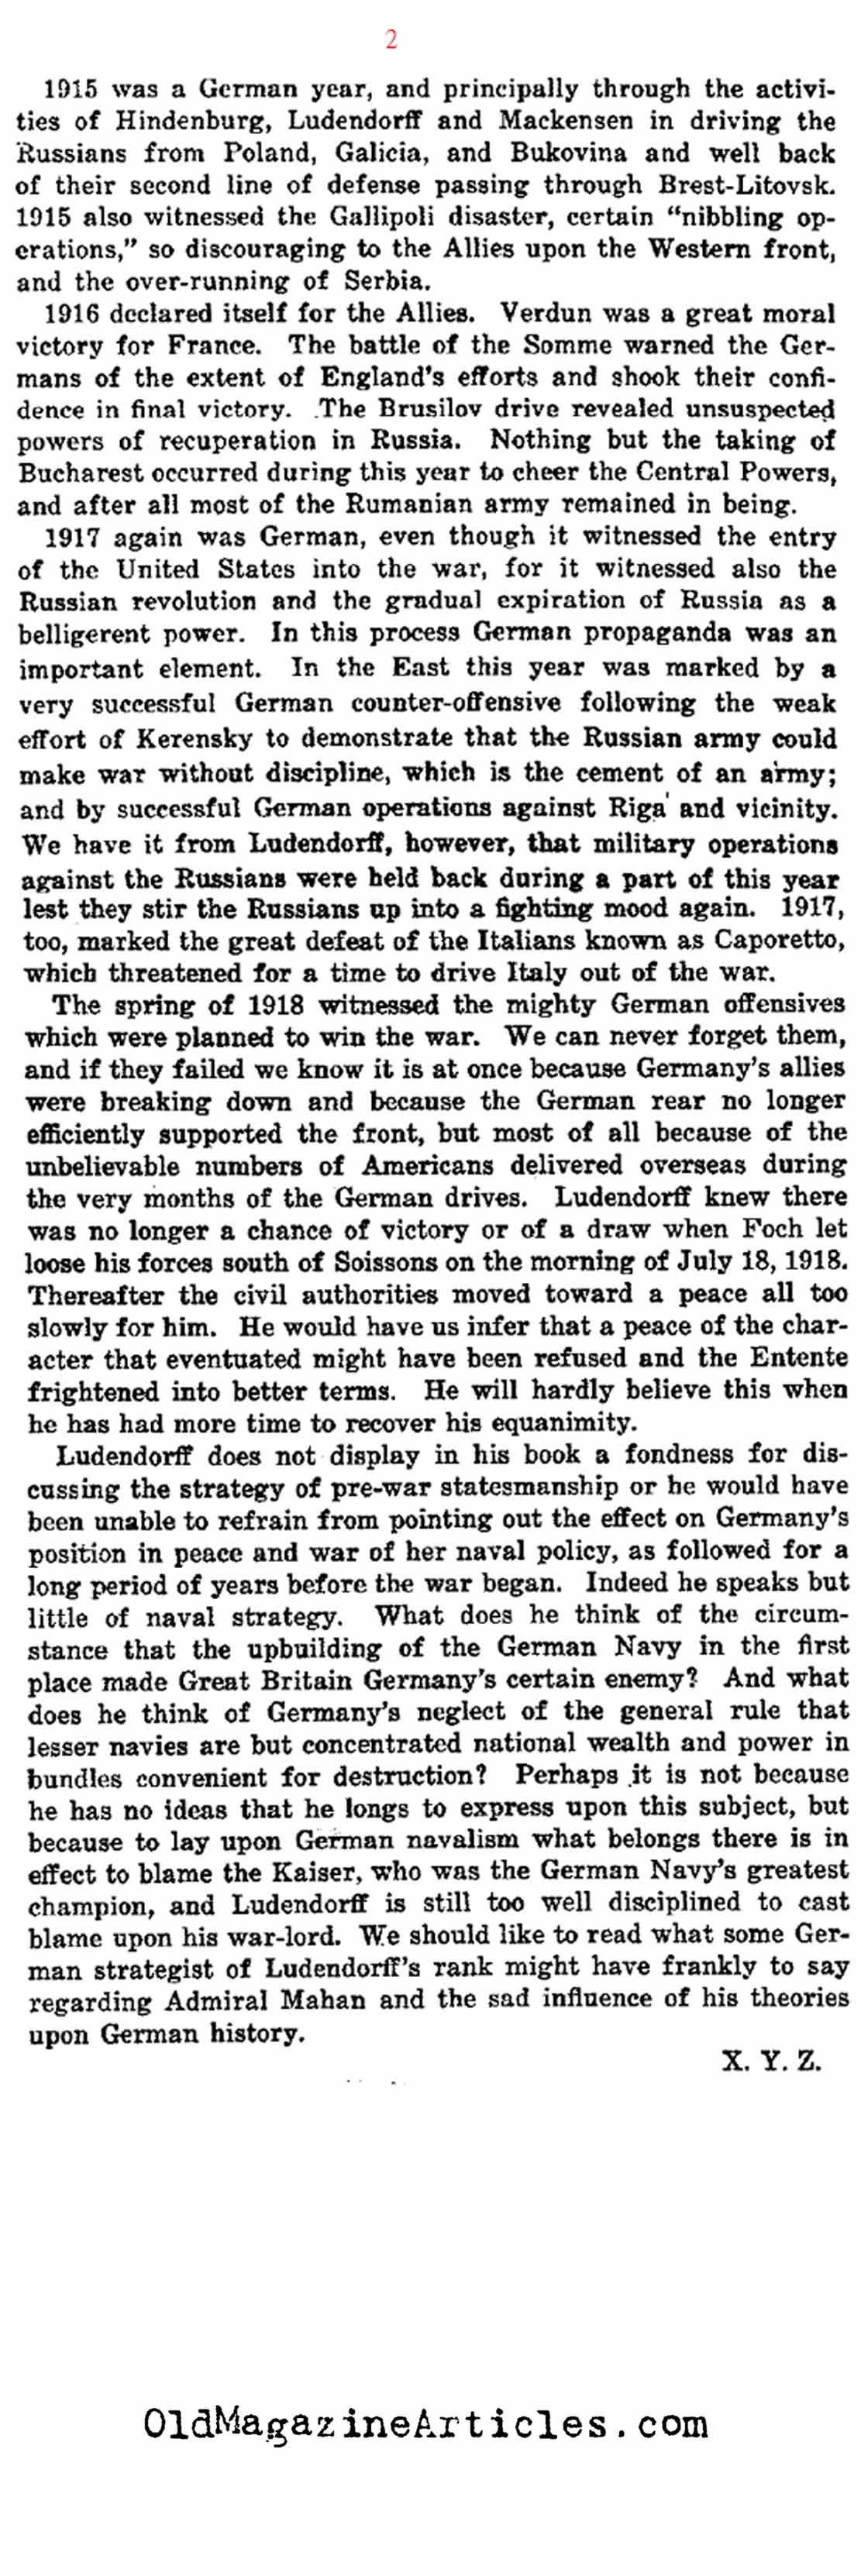 Ludendorff's Apology (The Nation, 1920)